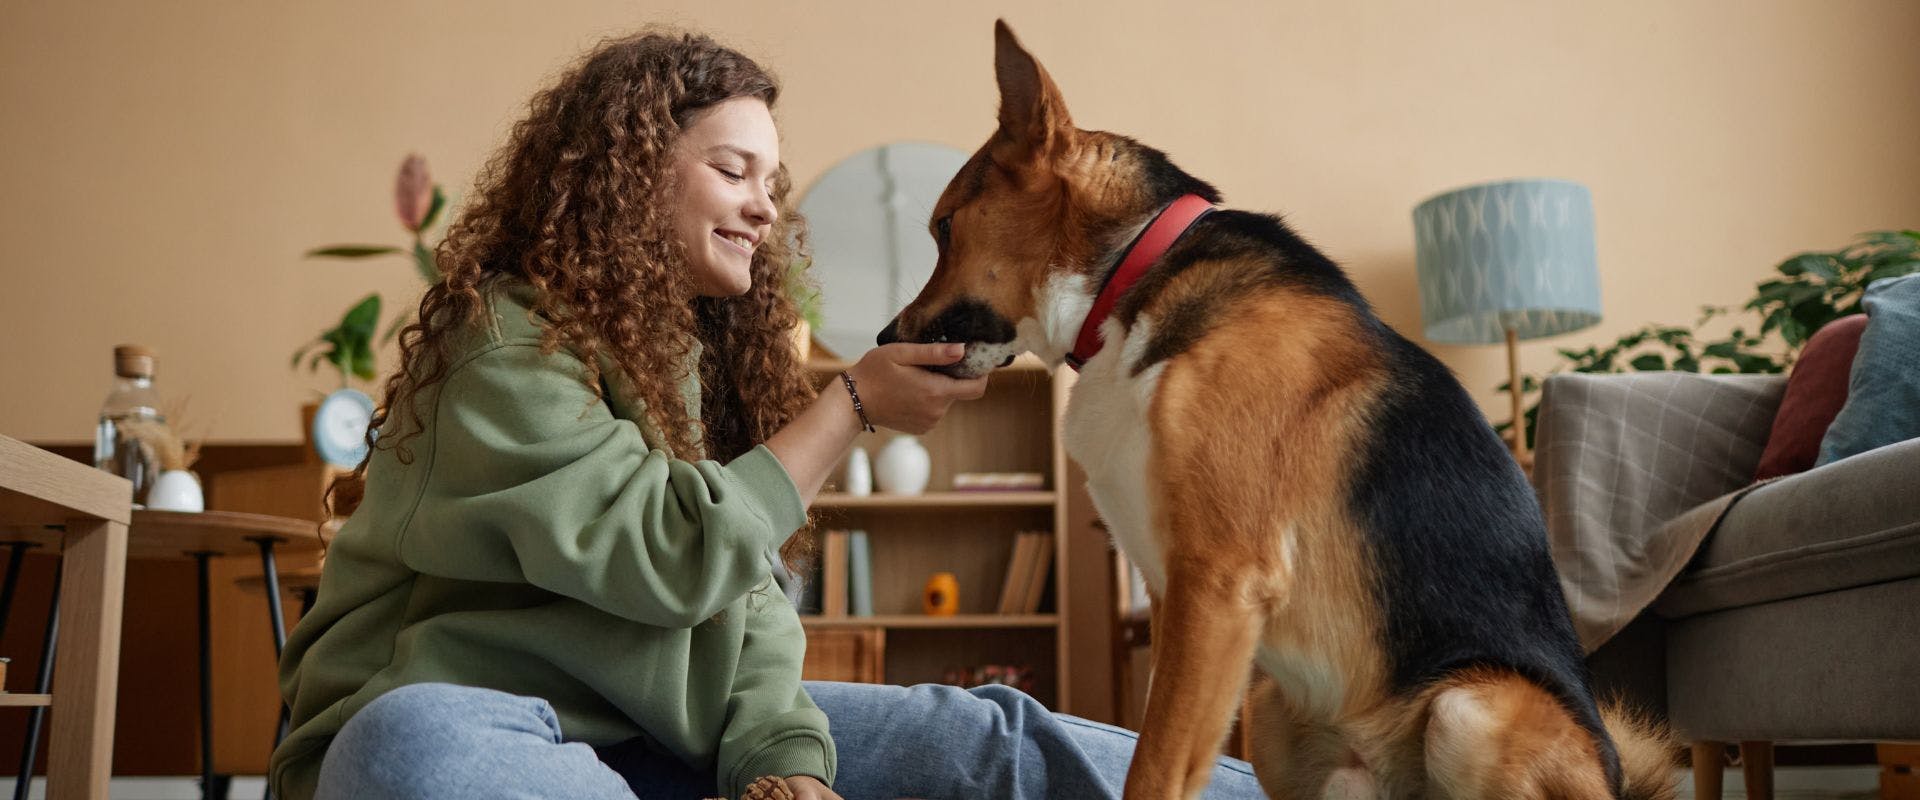 Side view of woman petting a large brown, black and white dog while sitting on the floor of a cosy home